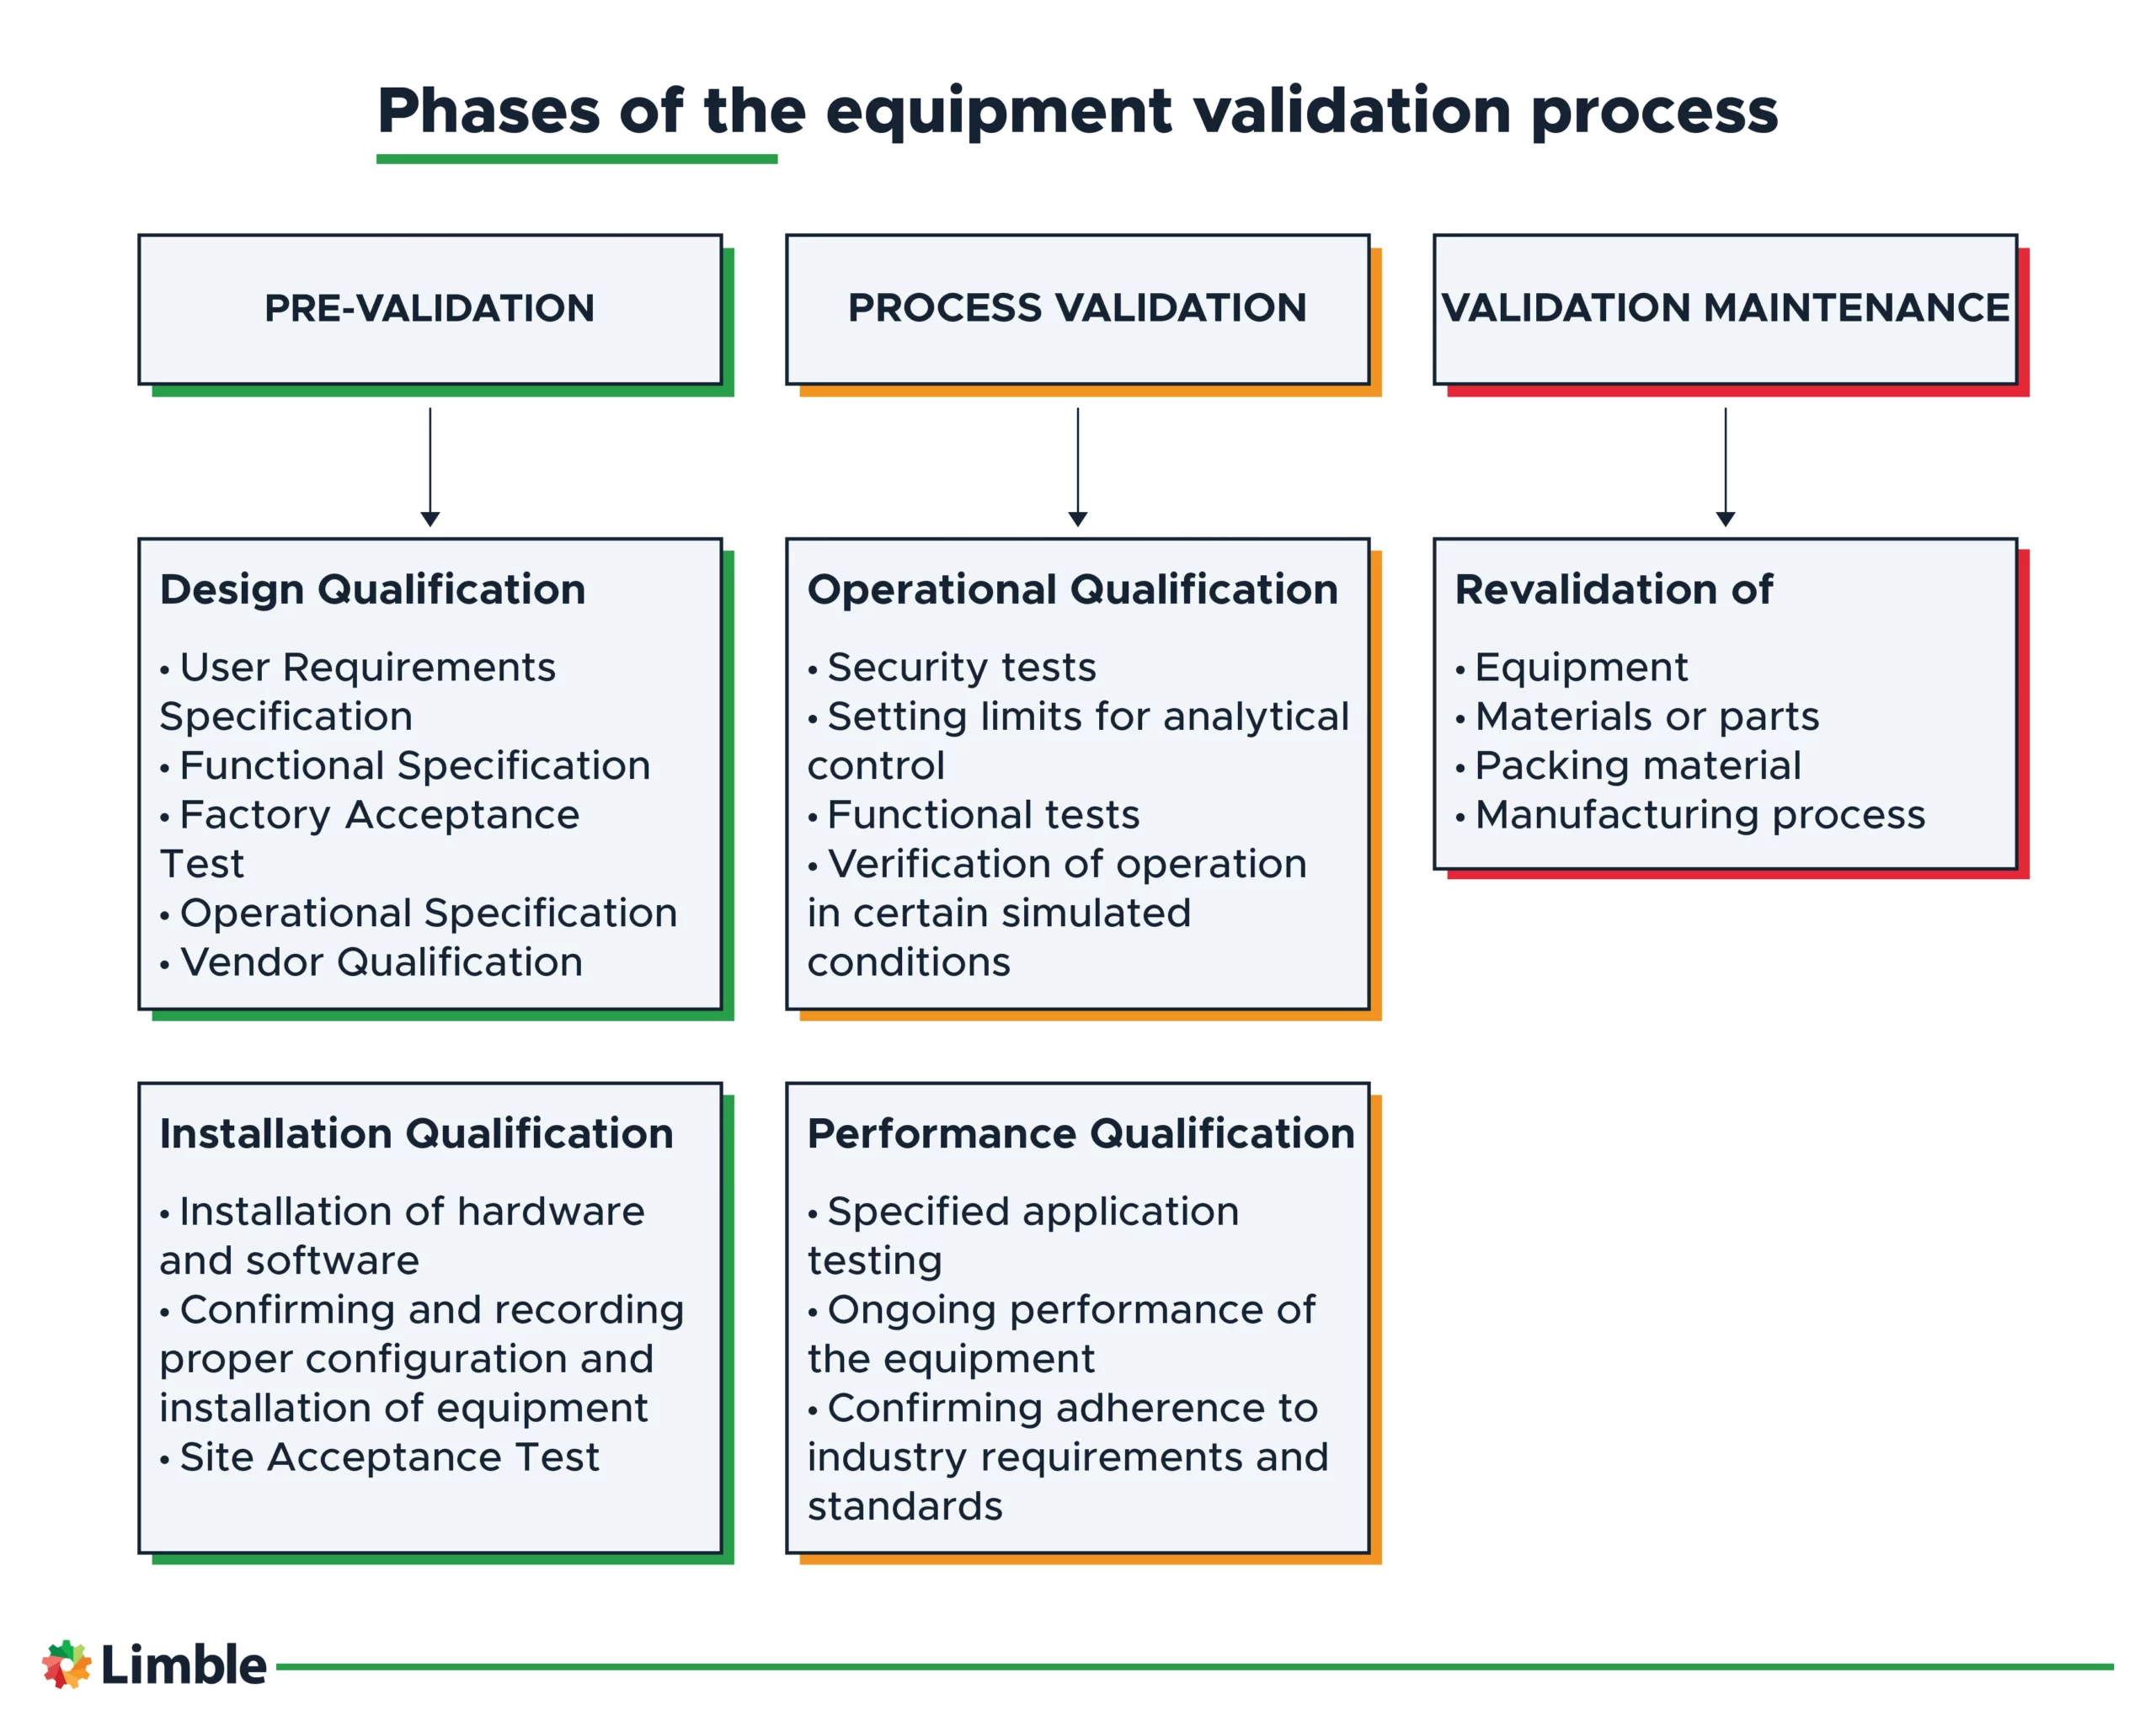 Phases of the equipment validation process.